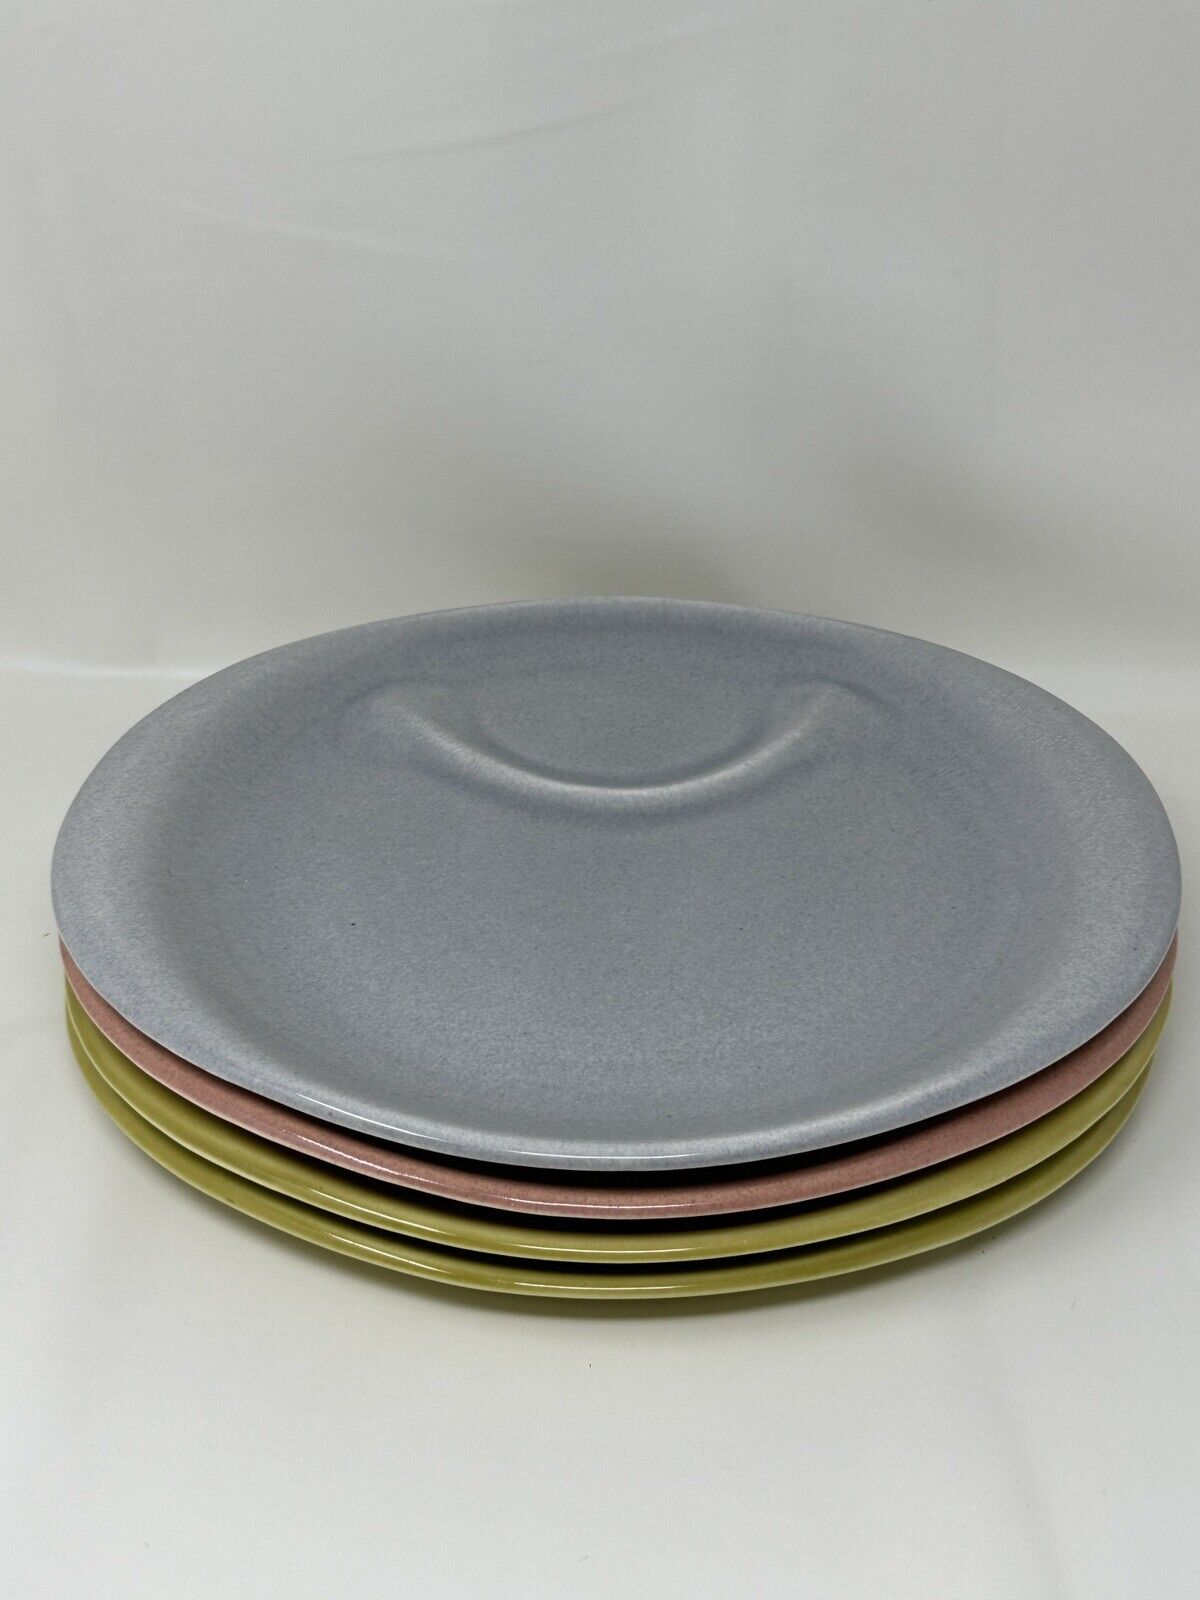 Russel Wright Steubenville Mid-Century Modern Oval Snack Plates ~ Set Of 4